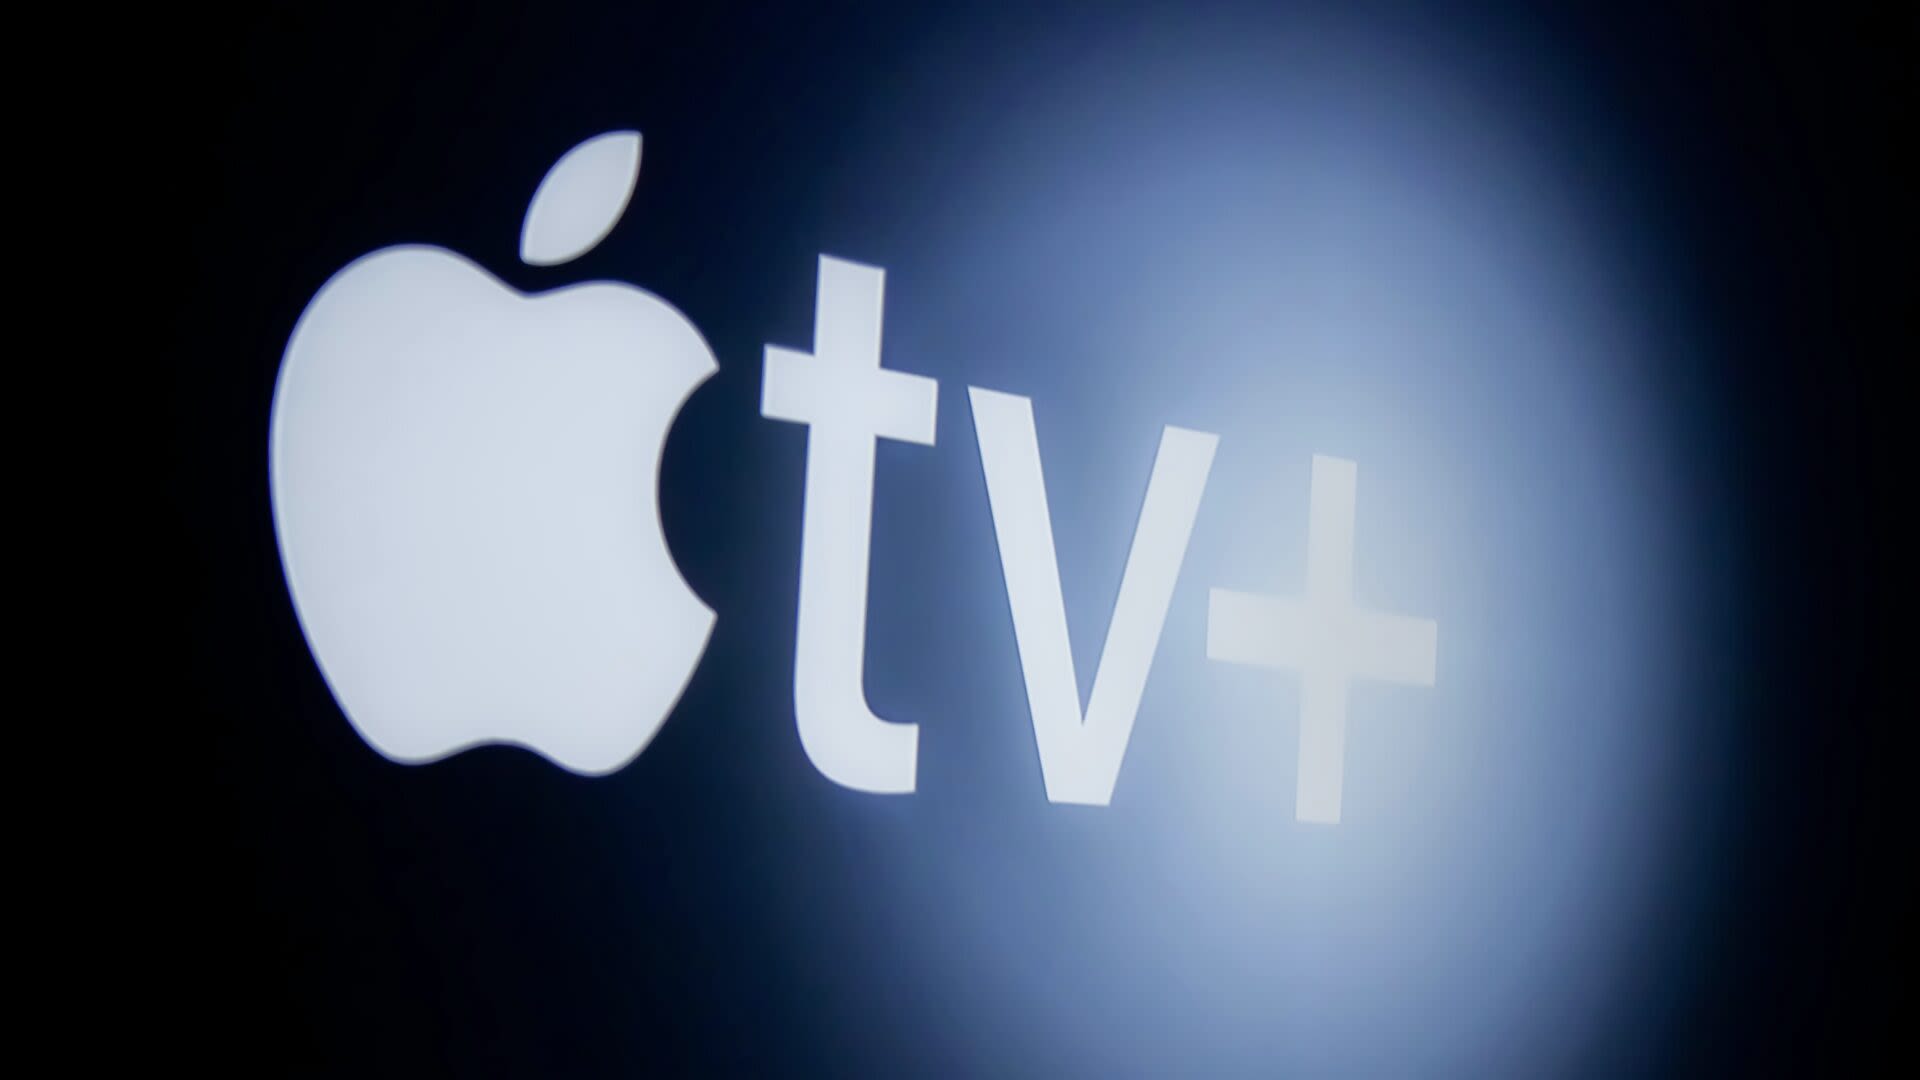 Box Office Bombs Mean This for Apple's Streaming Budget